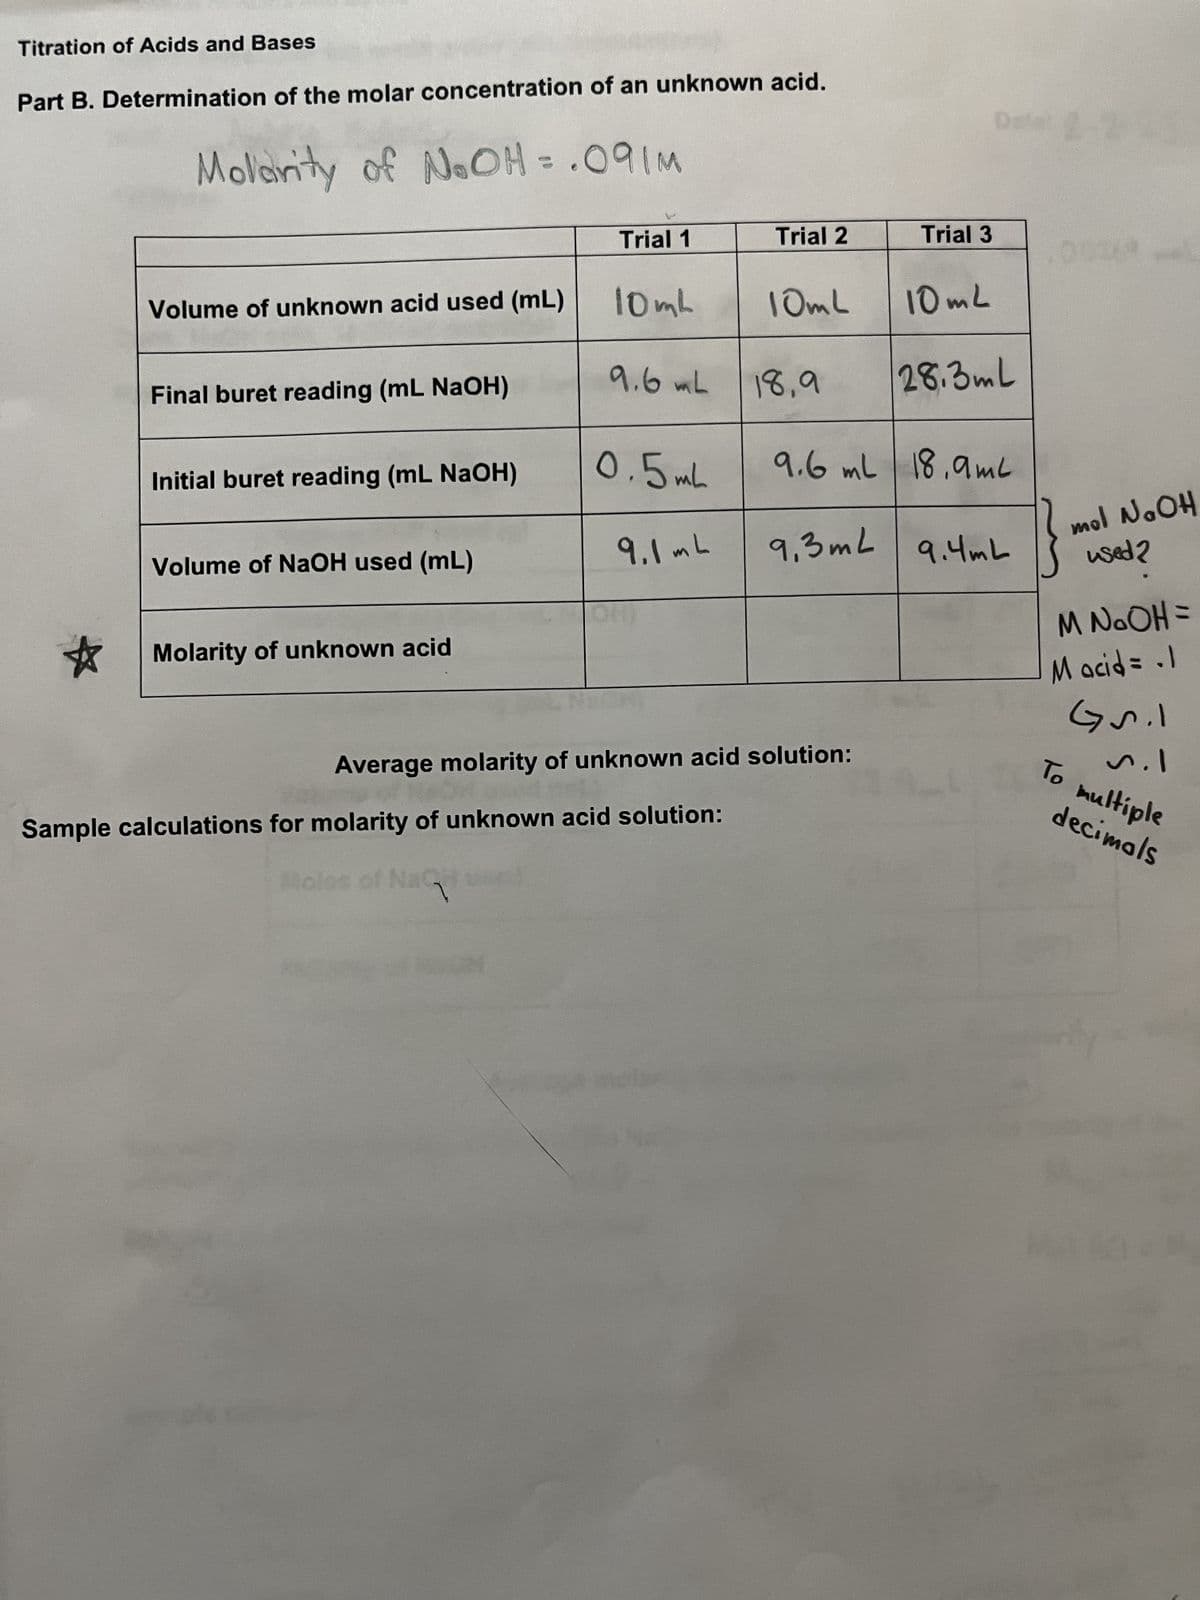 Titration of Acids and Bases
Part B. Determination of the molar concentration of an unknown acid.
Molarity of N₂OH = .09M
☆
Volume of unknown acid used (mL)
Final buret reading (mL NaOH)
Initial buret reading (mL NaOH)
Volume of NaOH used (mL)
Molarity of unknown acid
Trial 1
10mb
Moles
9.6 mL
0.5mL
9.1mL
(OH)
Sample calculations for molarity of unknown acid solution:
Trial 2
10mL
18,9
Average molarity of unknown acid solution:
Trial 3
10mL
28.3mL
9.6 ml 18.9ml
9,3mL 9.4mL
mol NaOH
used?
M N₂OH =
M acid = .1
Gril
To multiple
decimals